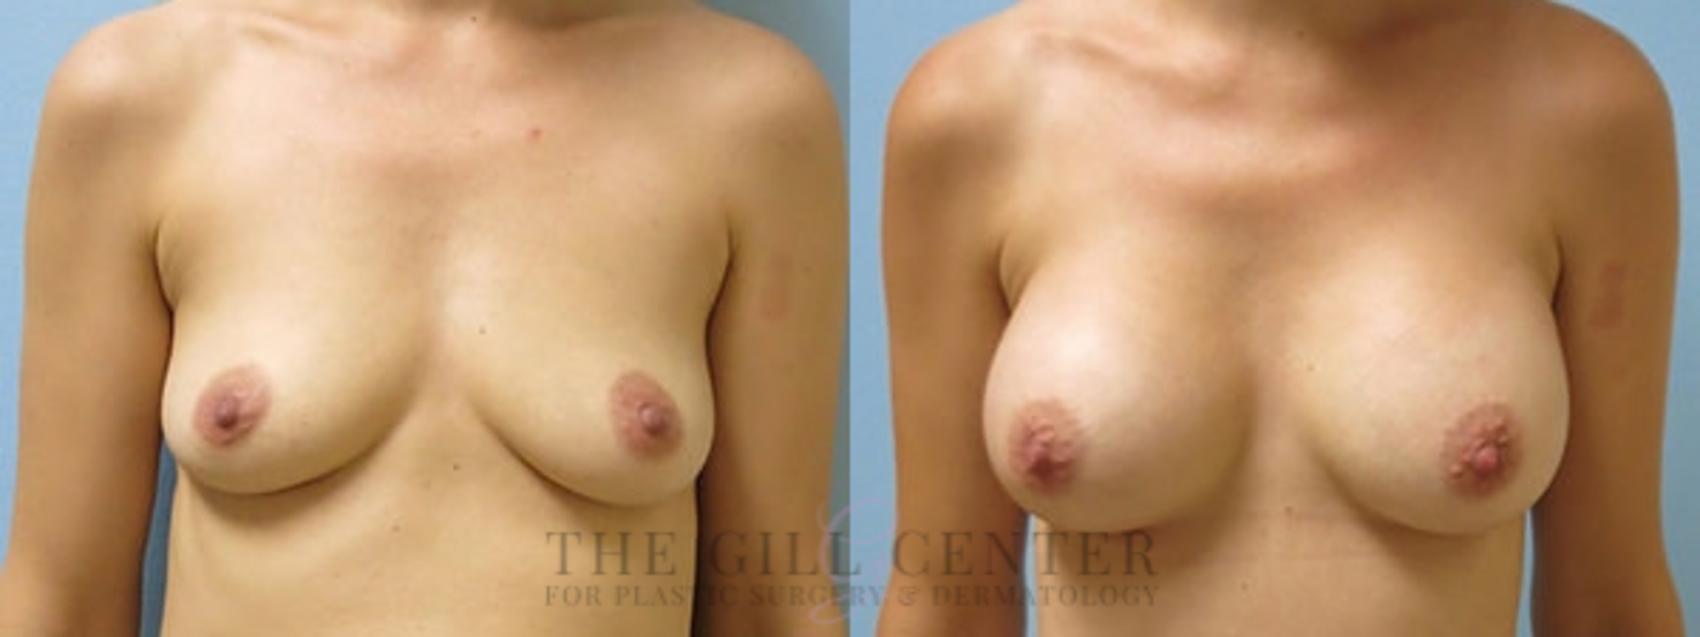 Breast Augmentation Case 428 Before & After Front | The Woodlands, TX | The Gill Center for Plastic Surgery and Dermatology